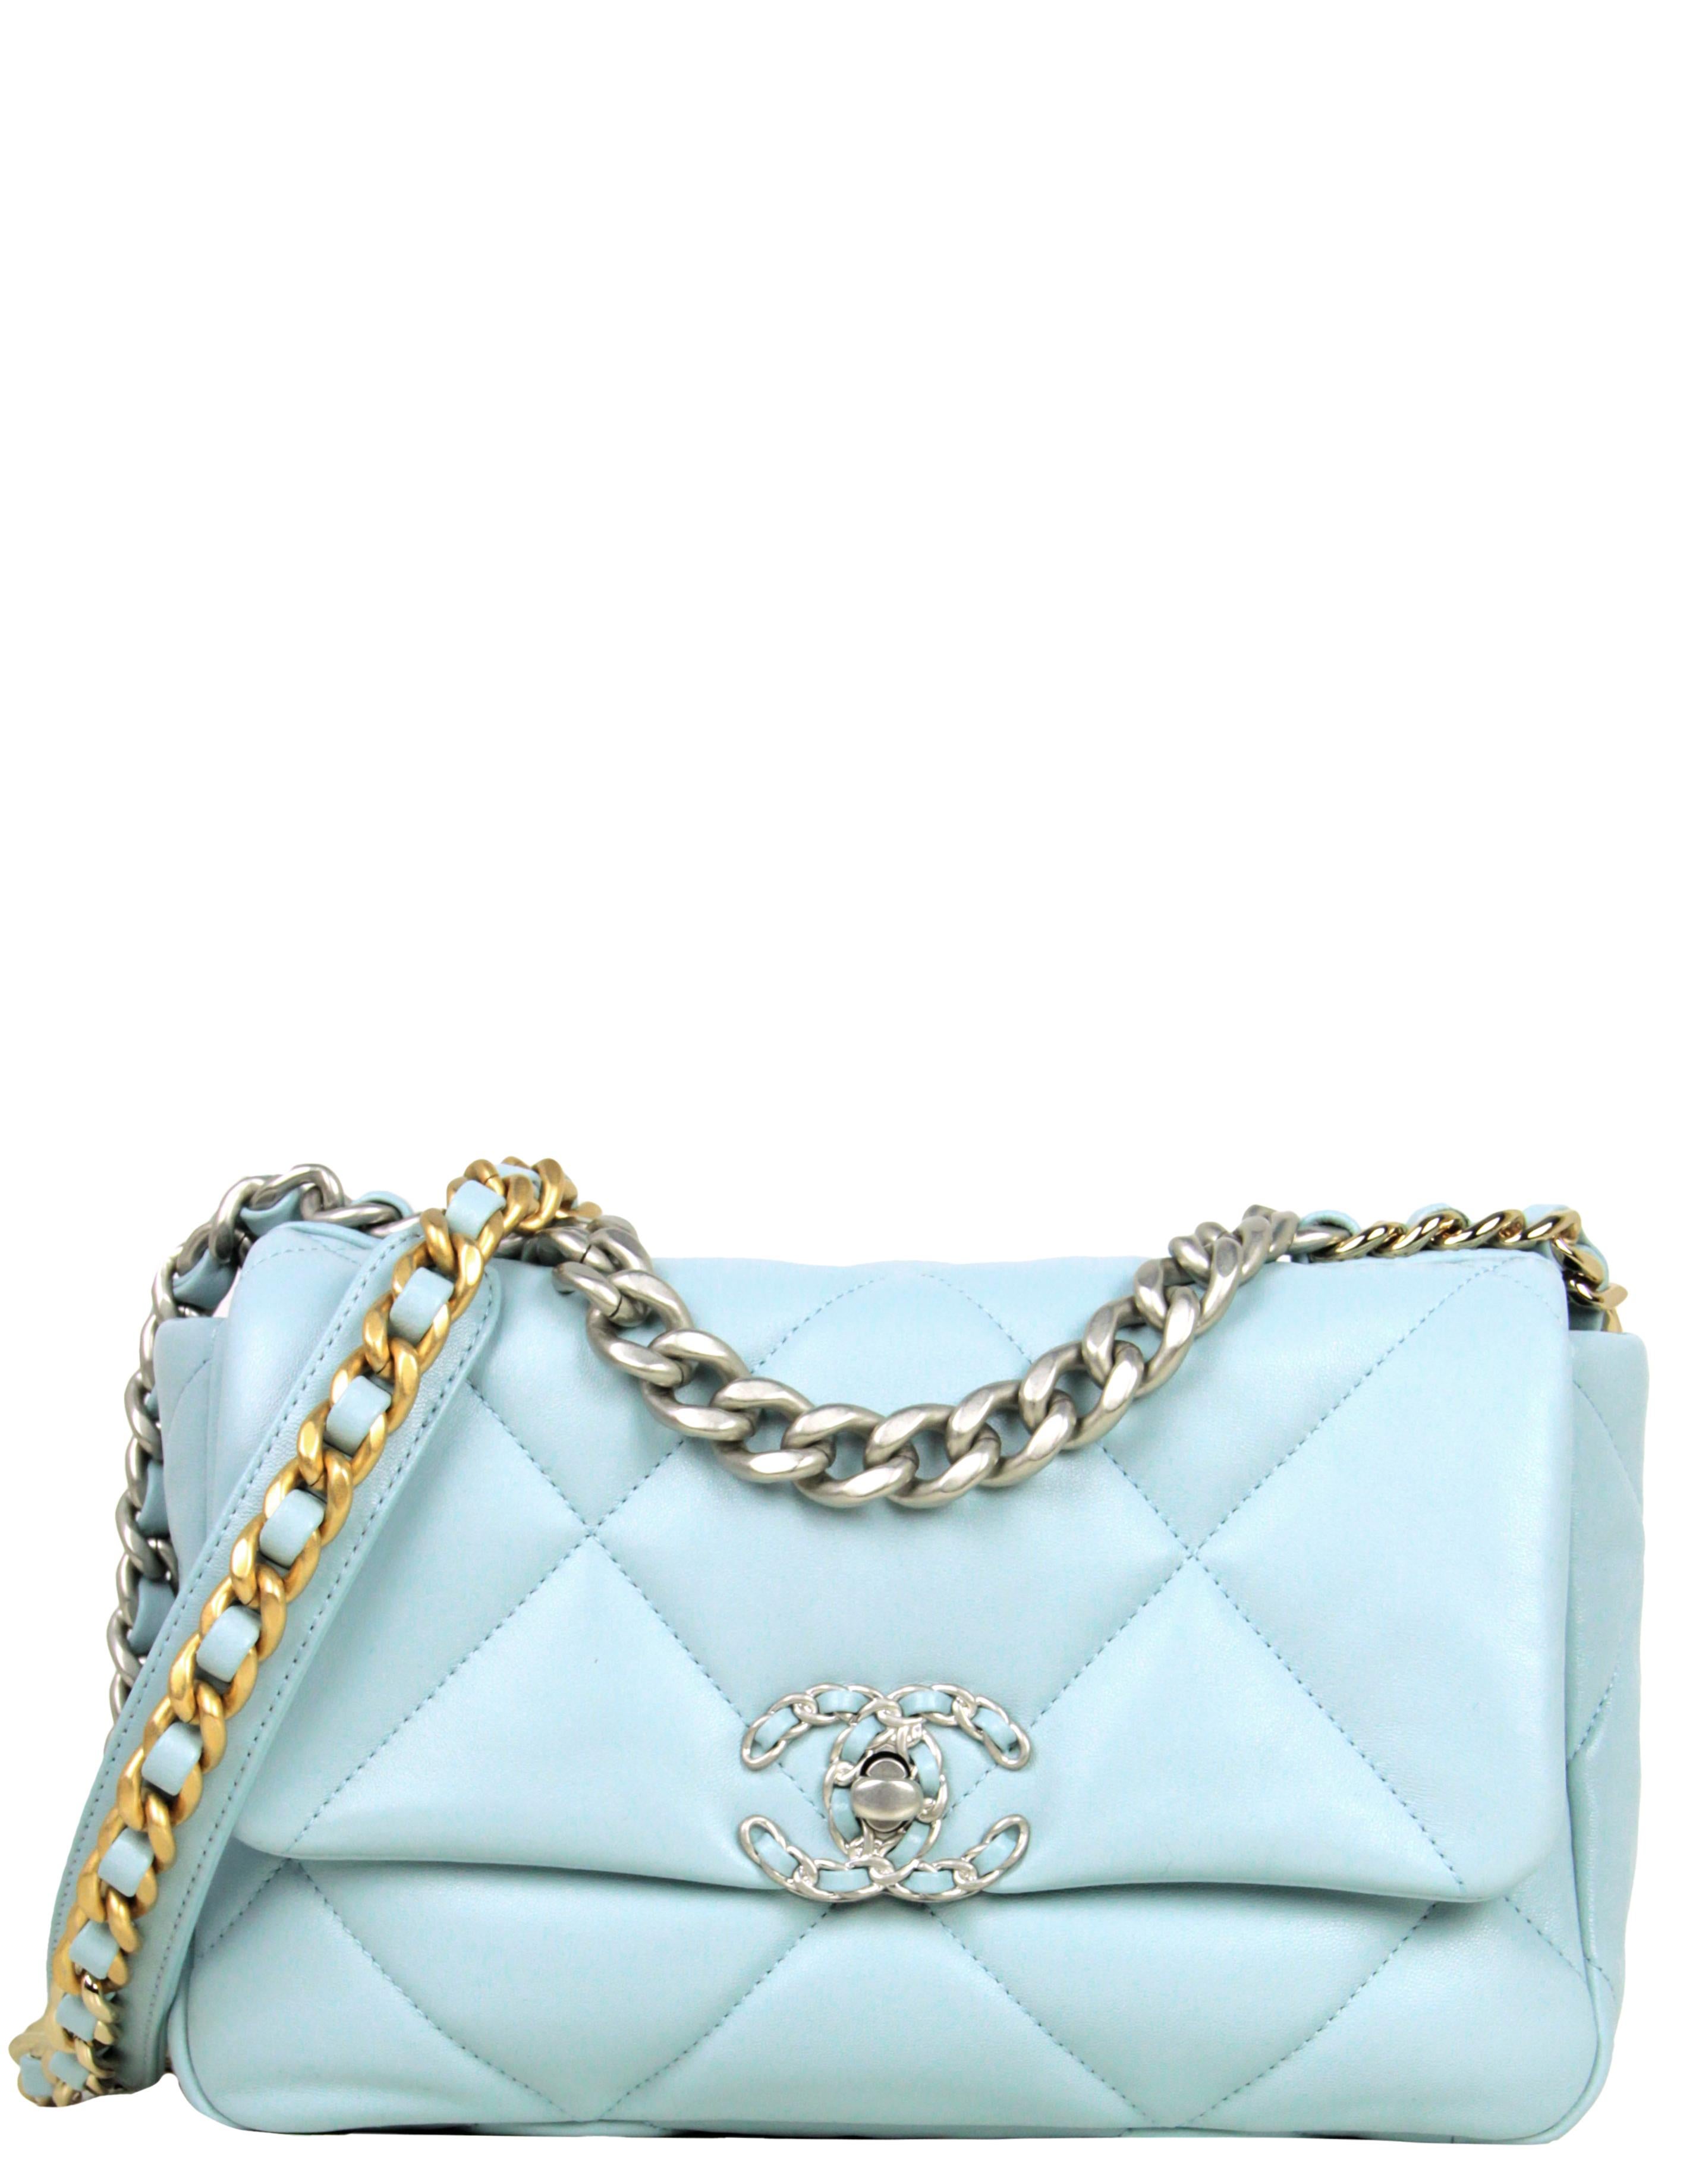 Chanel 2022 Light Blue Lambskin Quilted Medium 19 Bag

Made In: Italy
Year of Production: 2022
Color: Light Blue
Hardware: Matte silvertone, shiny silvertone, matte goldtone, ruthenium, and dark silver
Materials: Leather, metal
Lining: